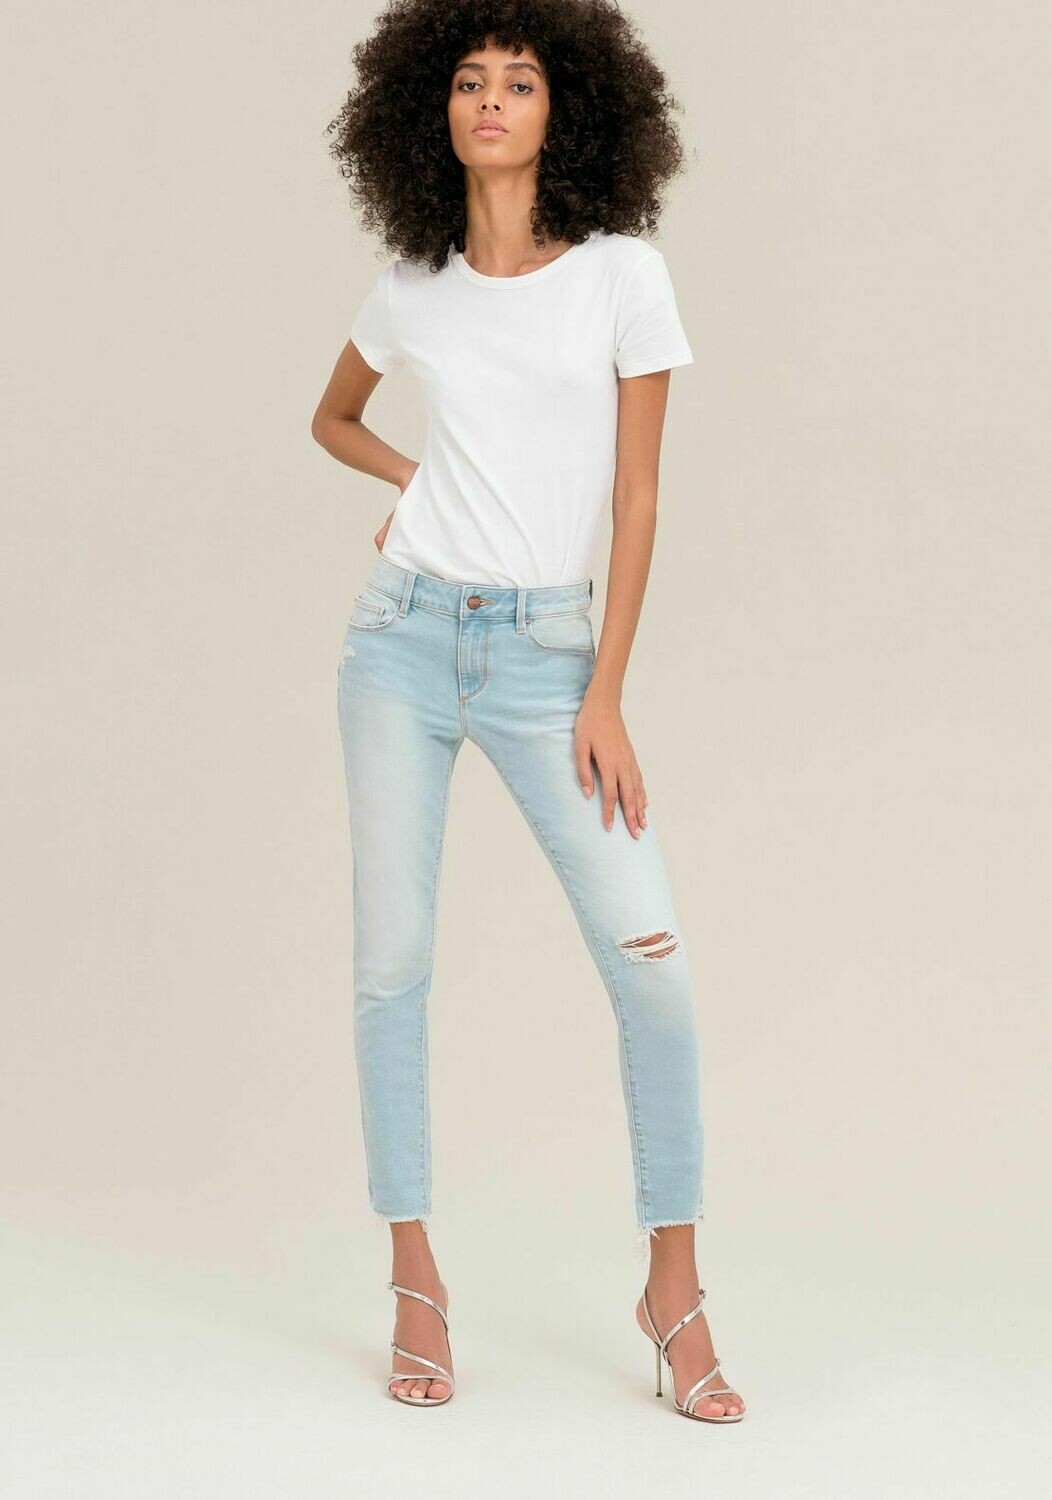 Jeans Bella perfect shape by Fracomina